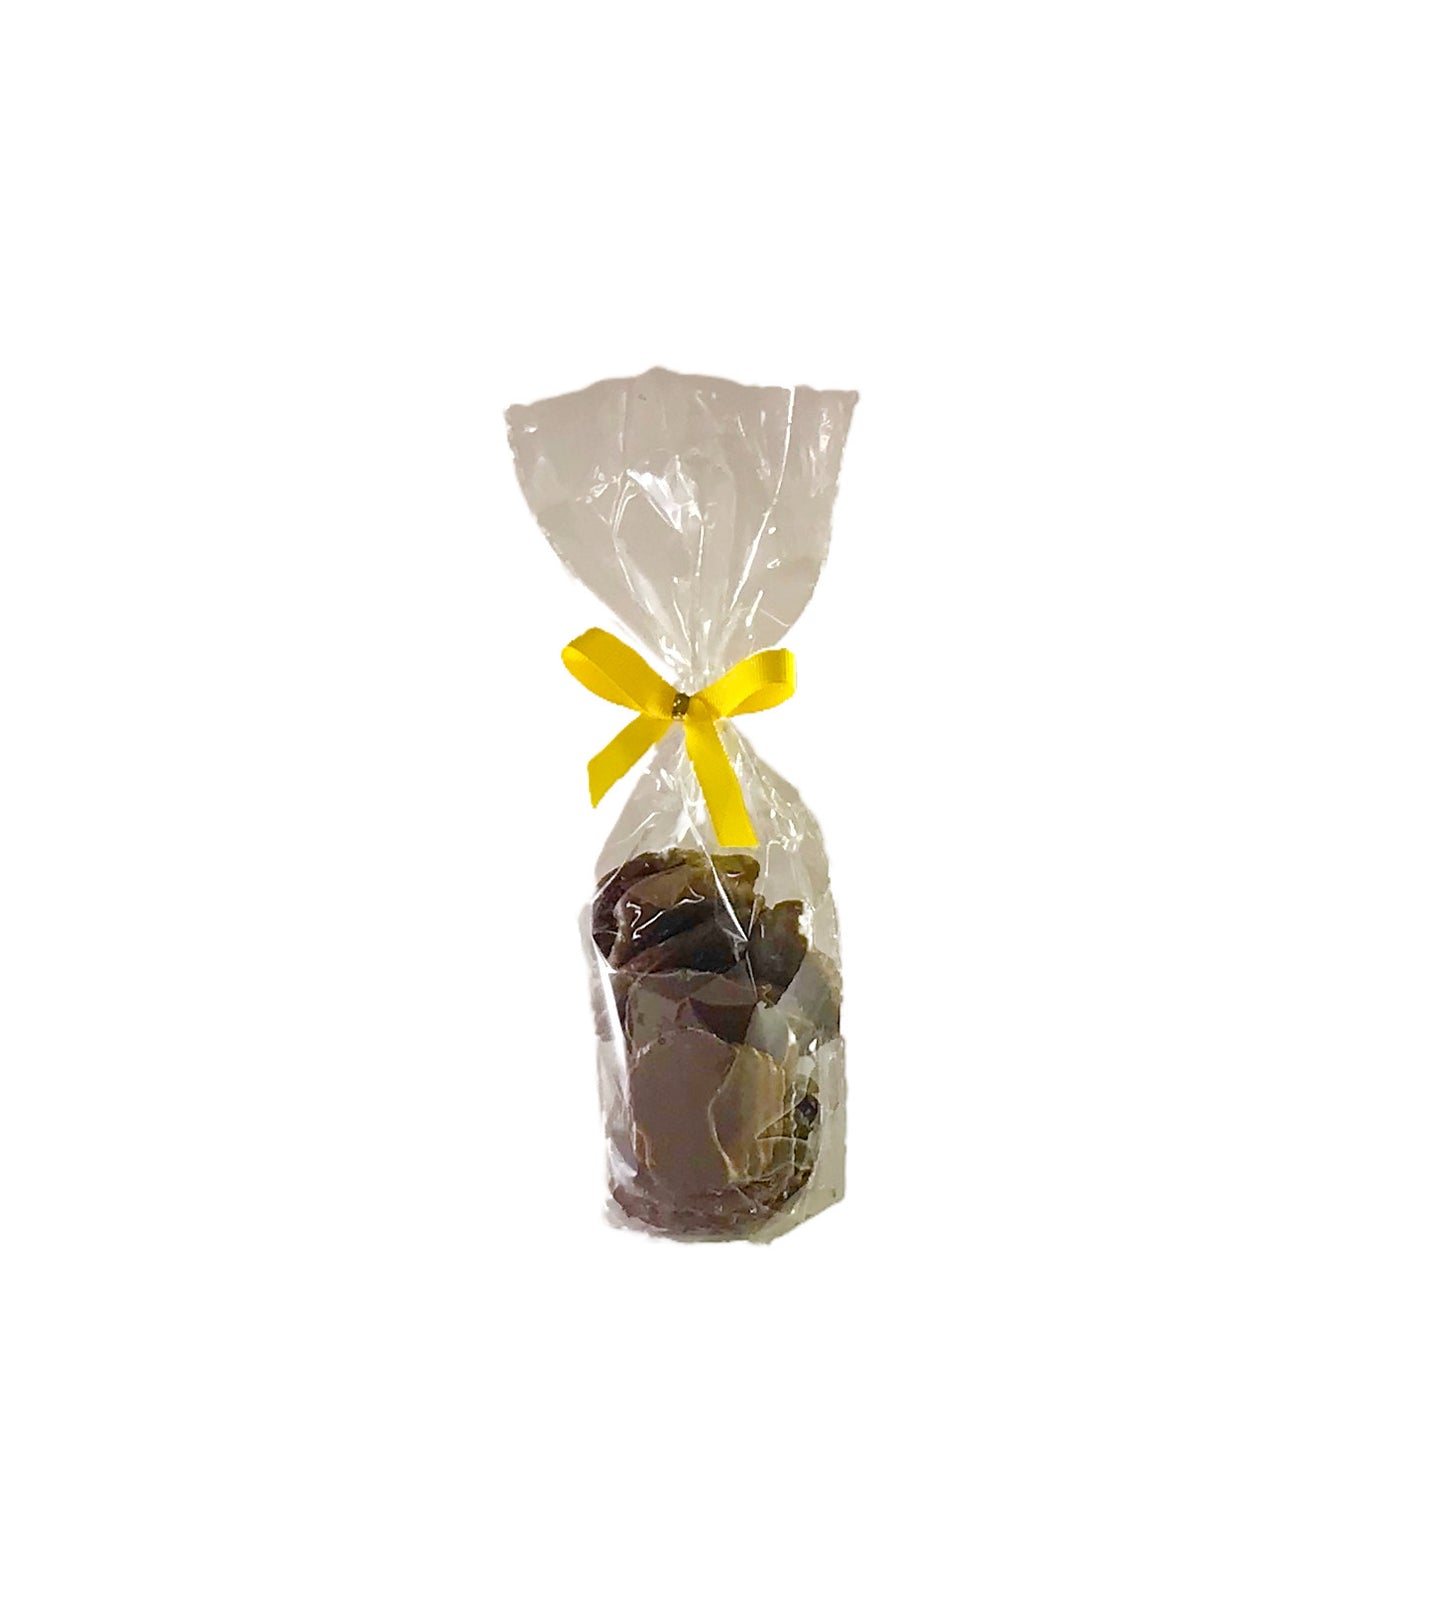 Bagged Milk Chocolate Covered Potato Chips